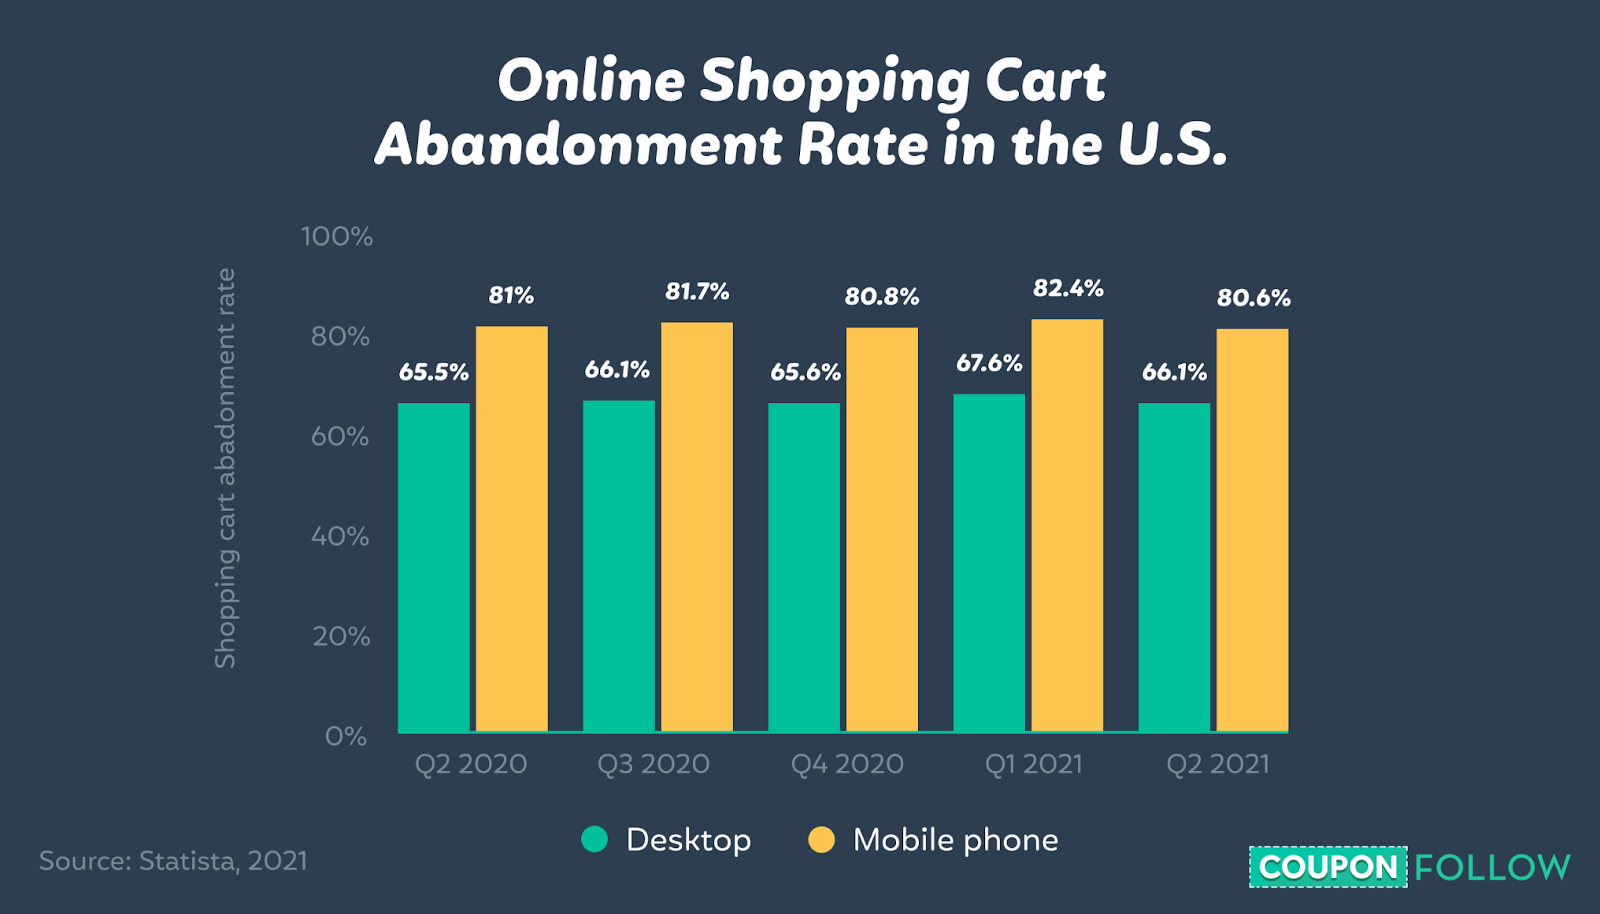 graph showing the percentage of online cart abandonment by device type from 2020 to 2021